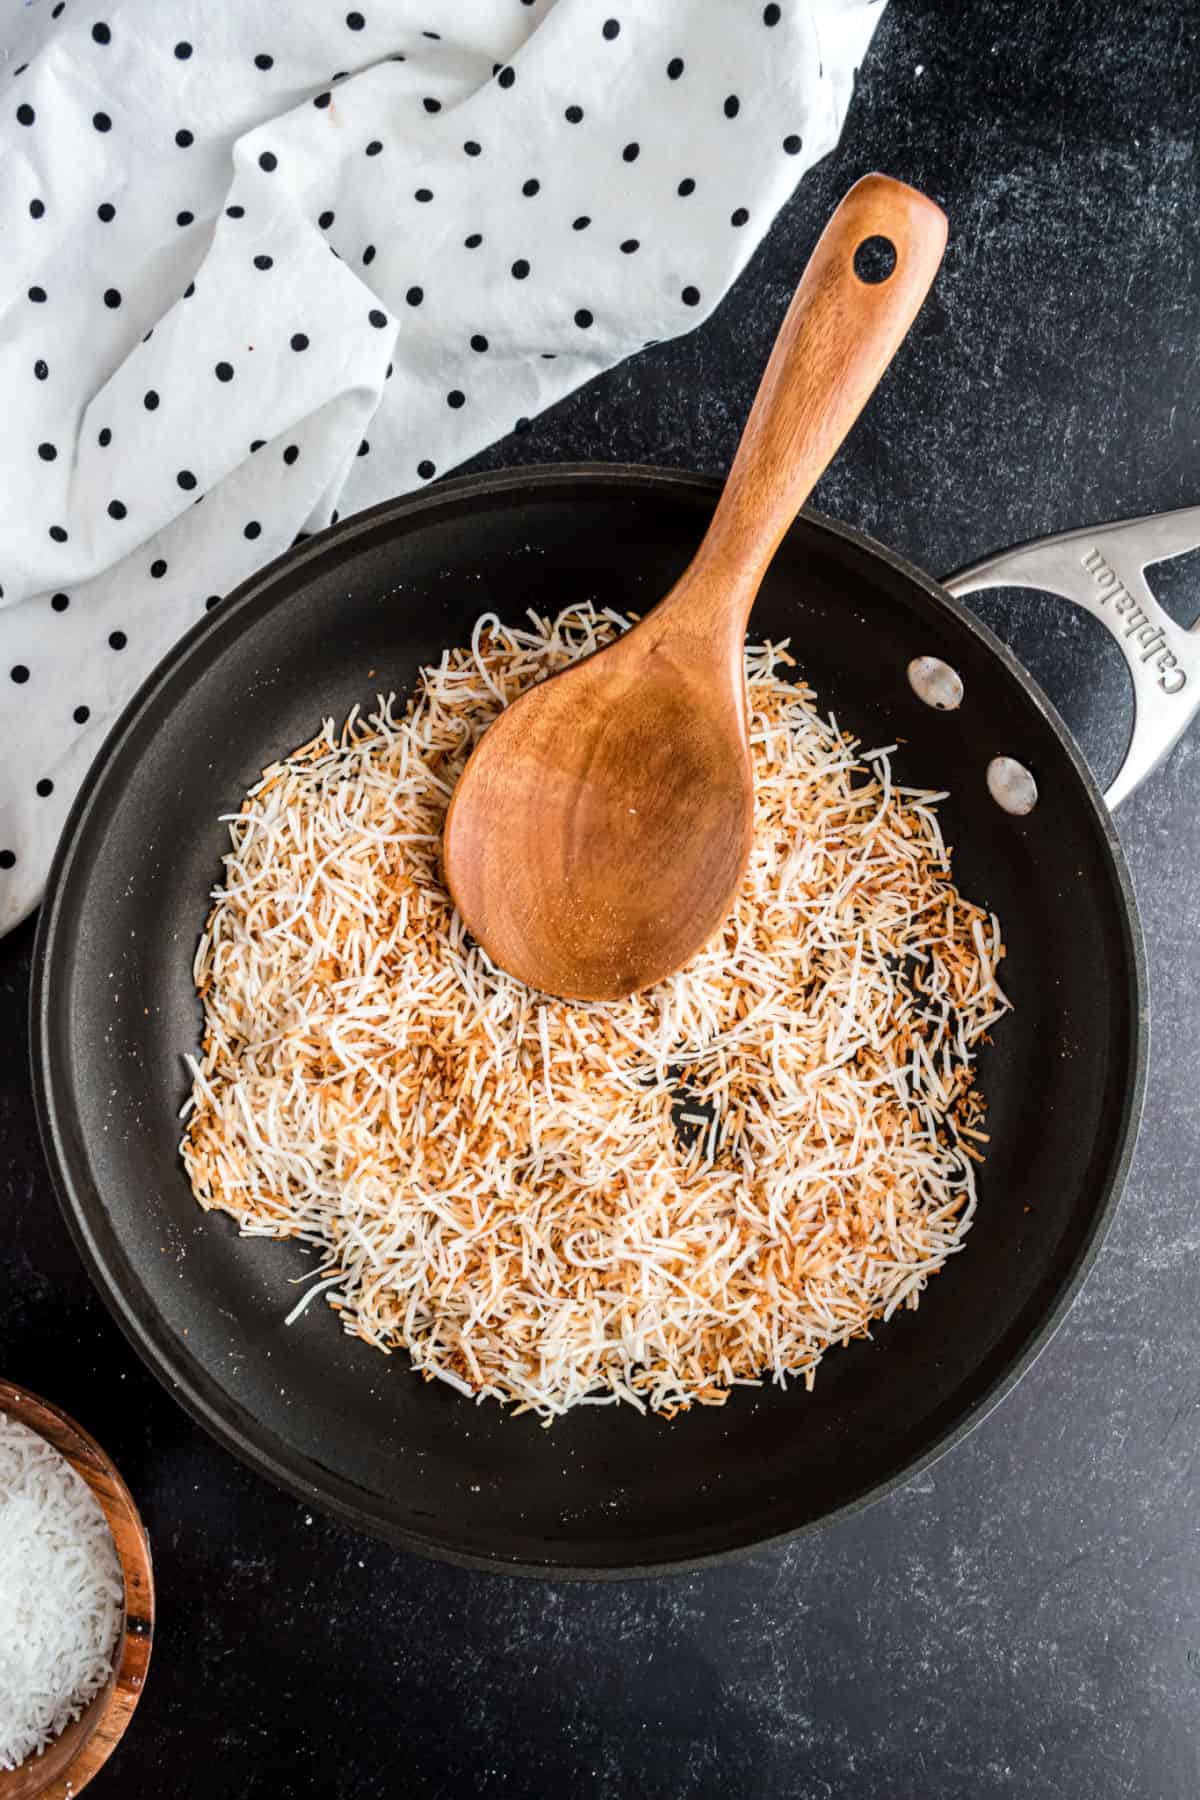 Toasted coconut in a skillet with wooden spoon.